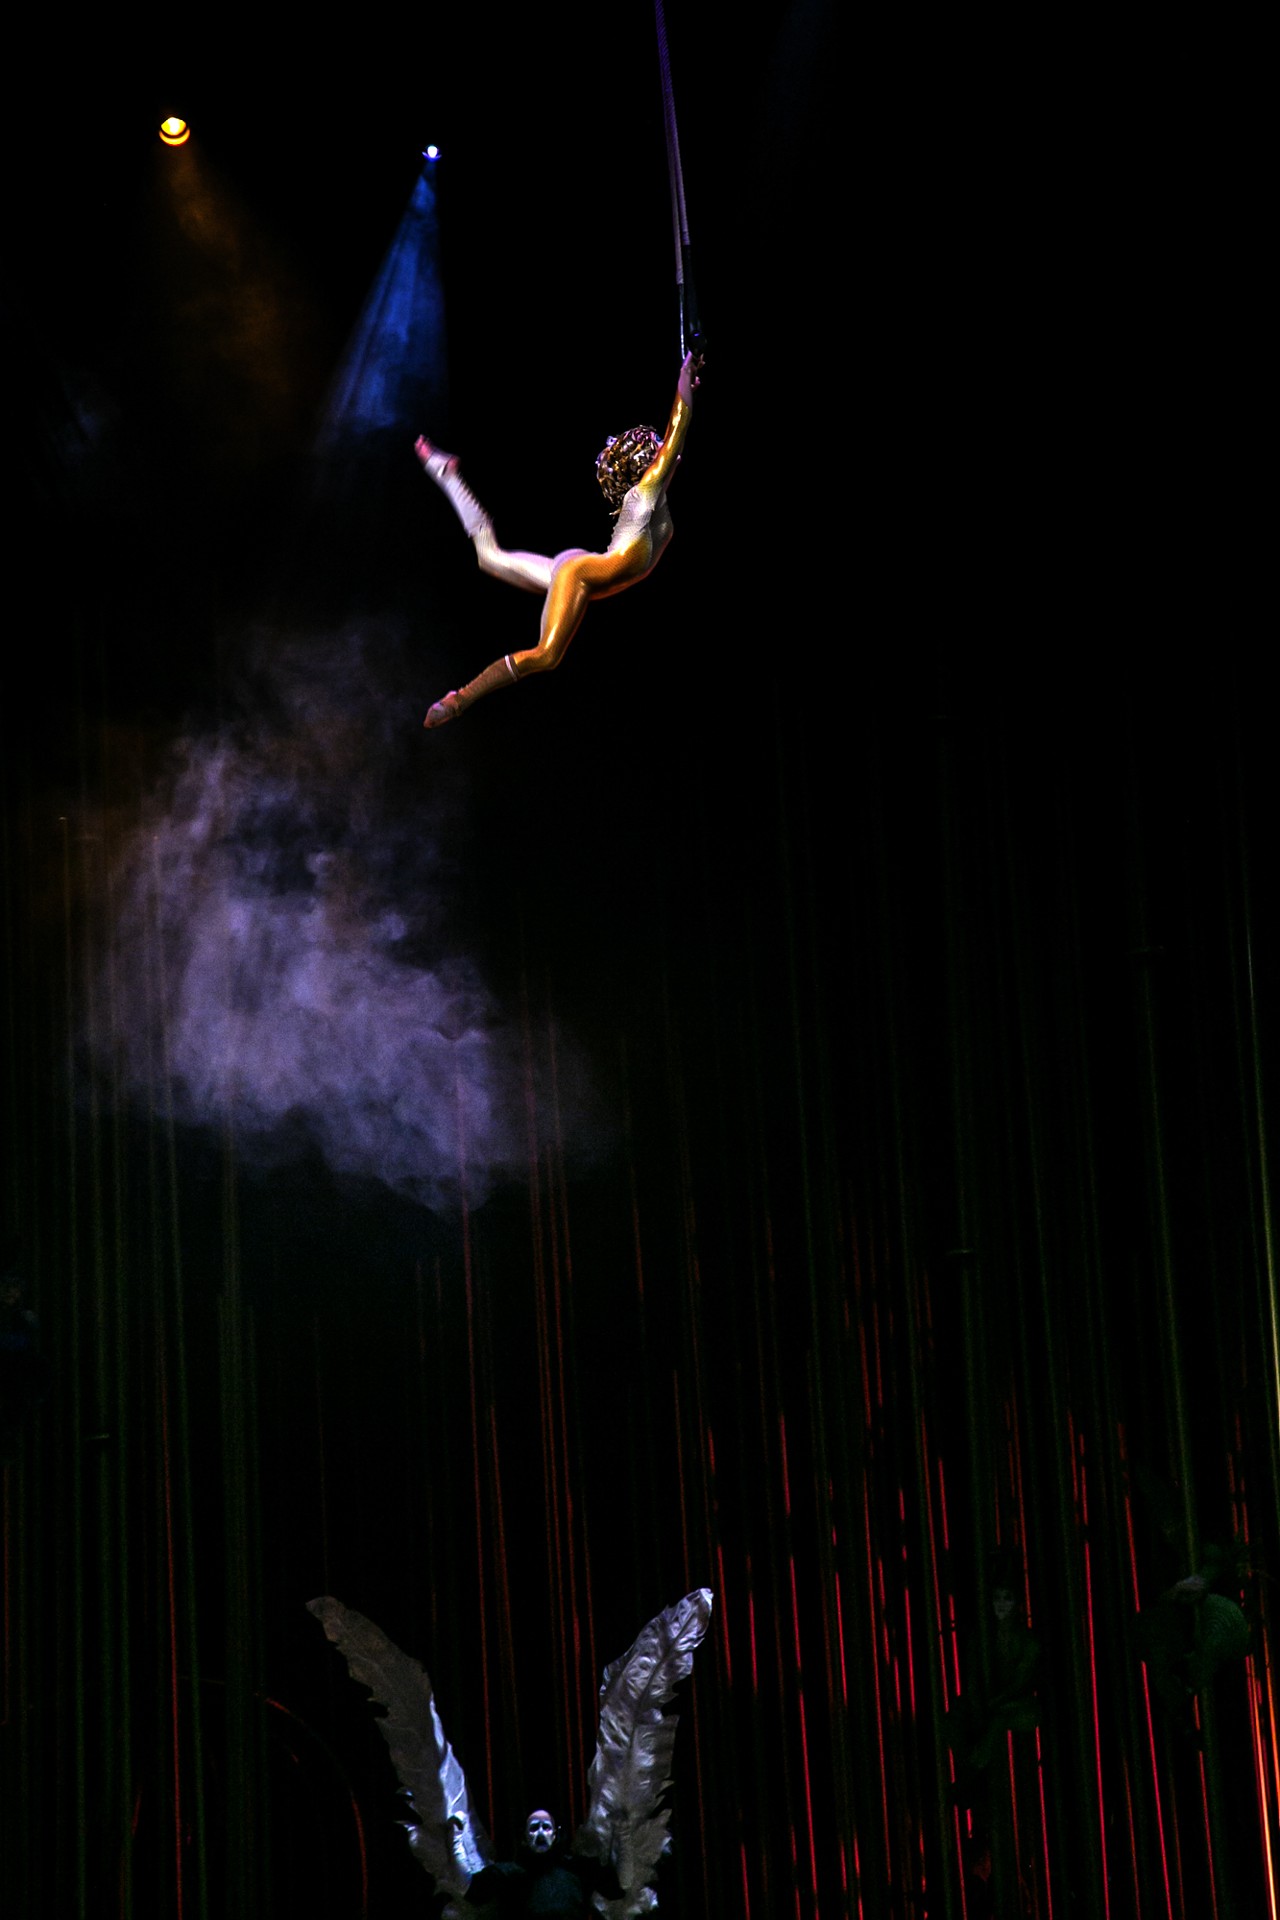 30 great pics from Cirque du Soleil